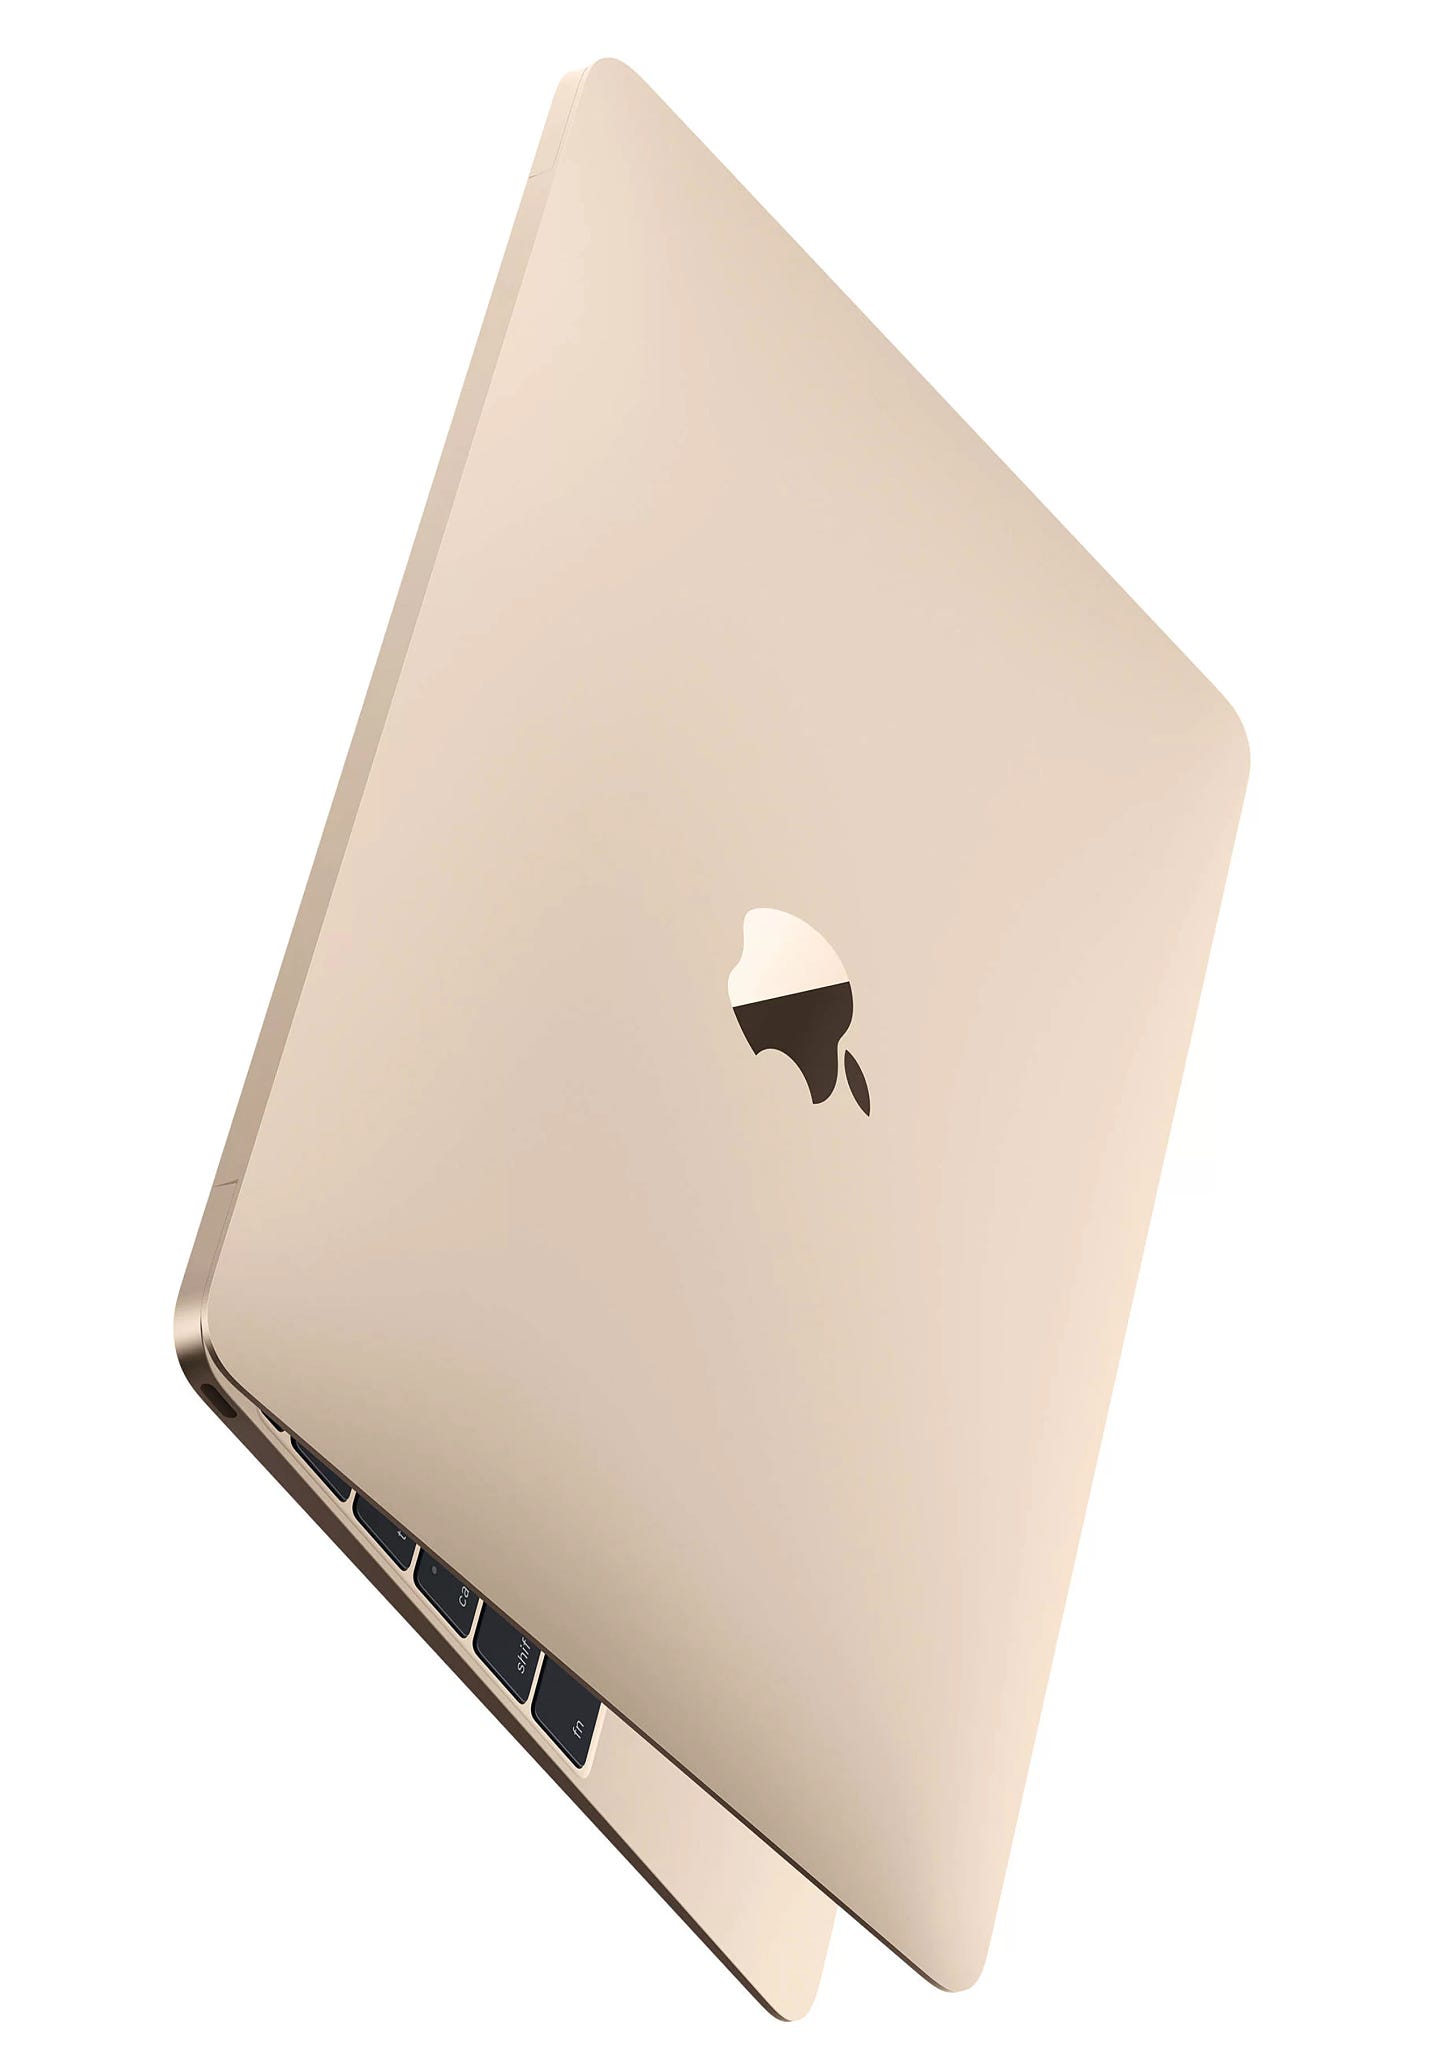 A render of the 12-inch Apple MacBook in Gold from 2015.